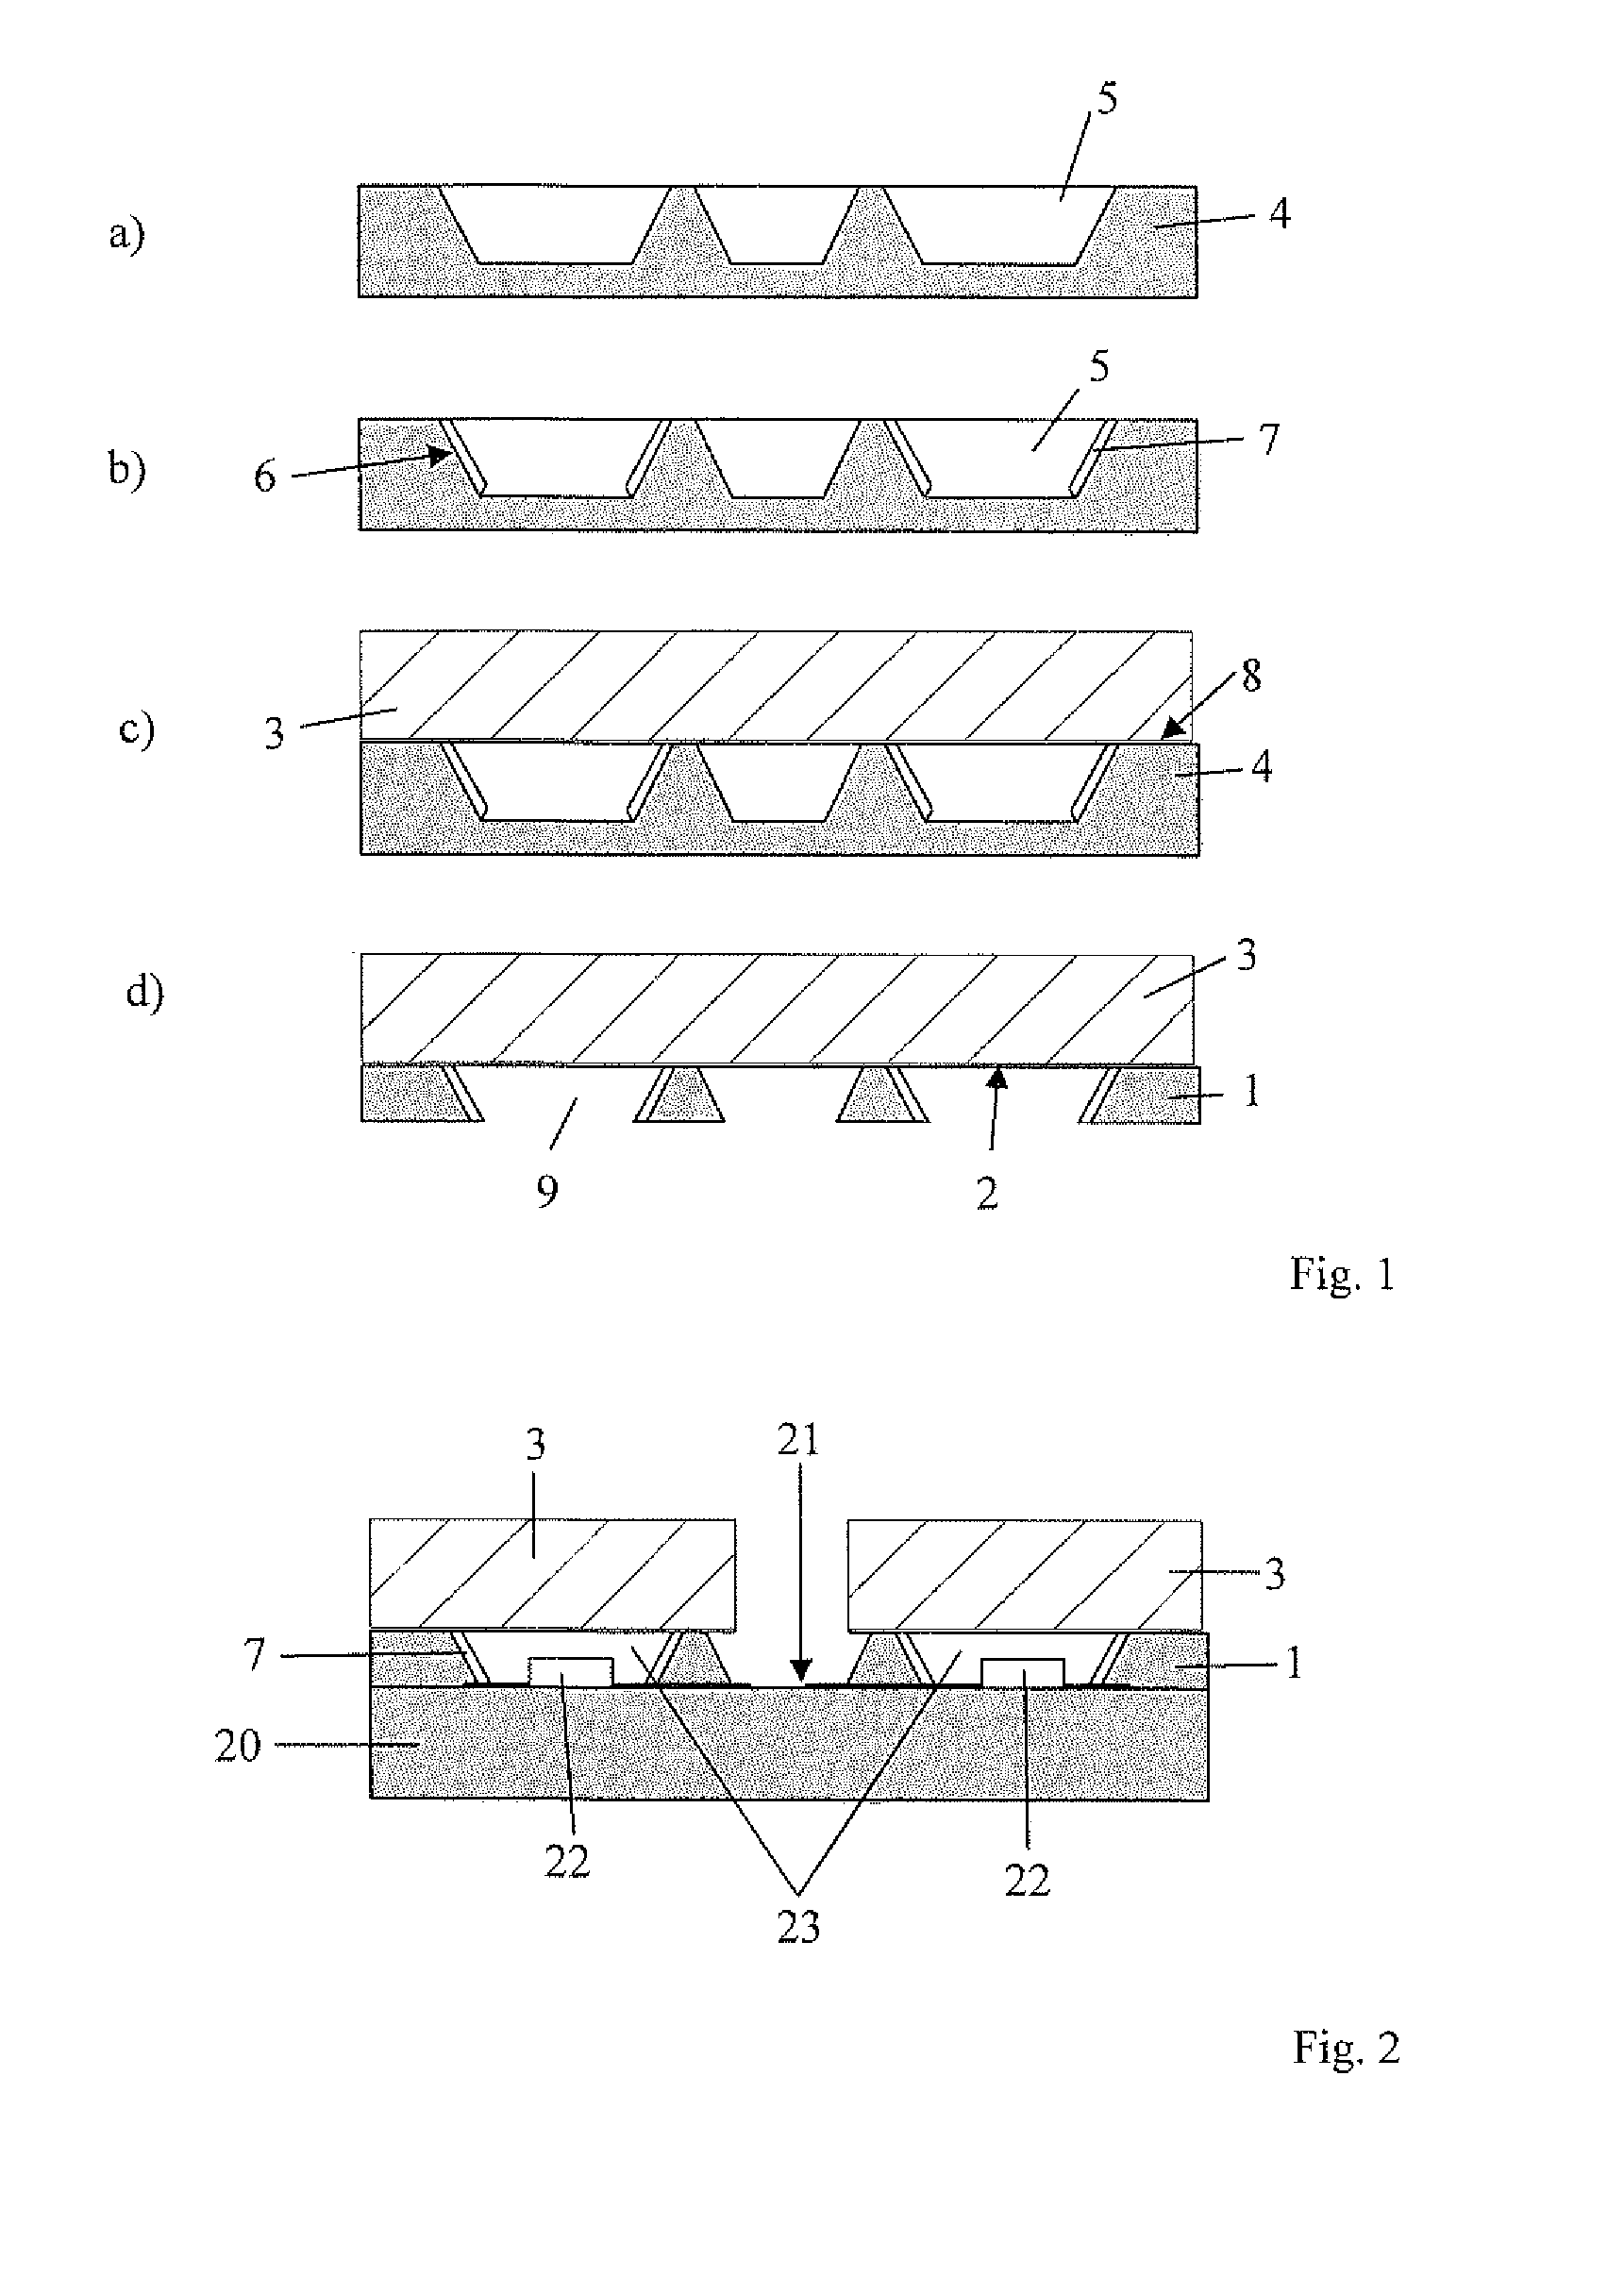 Method for manufacturing an arrangement with a component on a carrier substrate and a method for manufacturing a semi-finished product